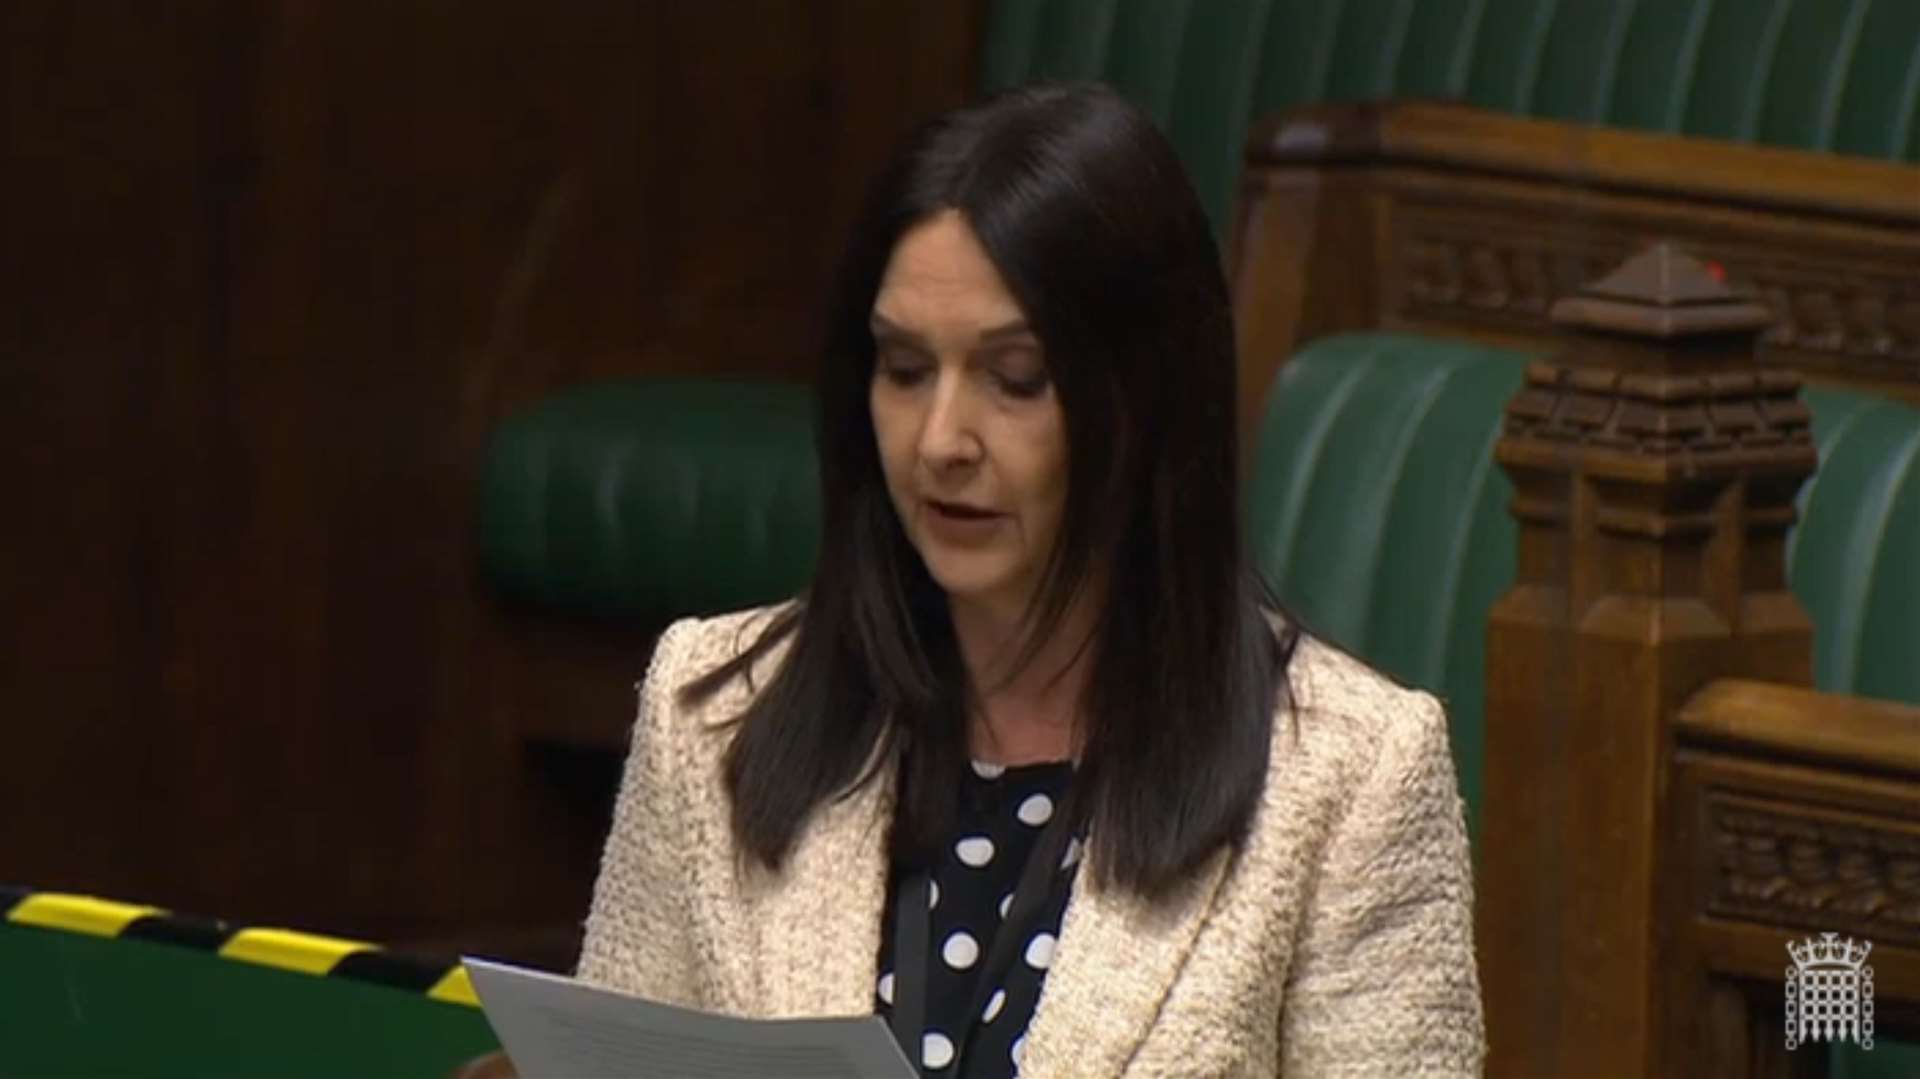 Margaret Ferrier was suspended by the SNP after it emerged she had broken lockdown rules. (Parliament TV)